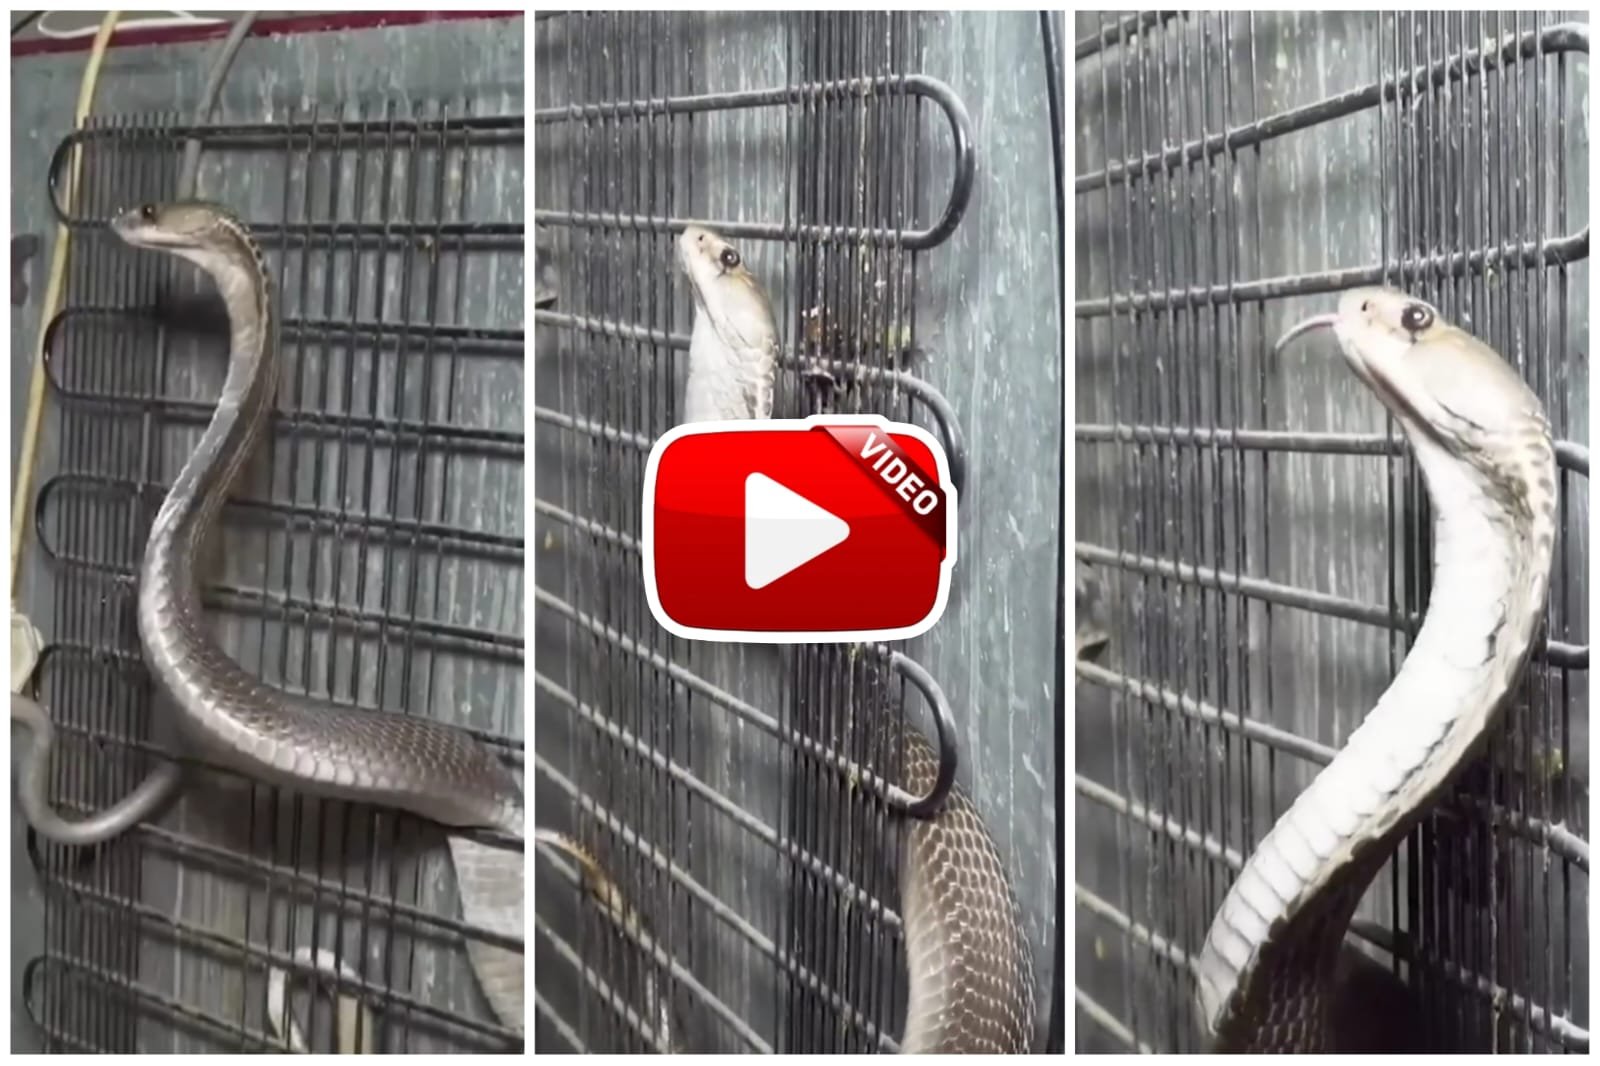 Cobra in Fridge | A dangerous cobra snake was sitting behind the refrigerator with its hood raised.